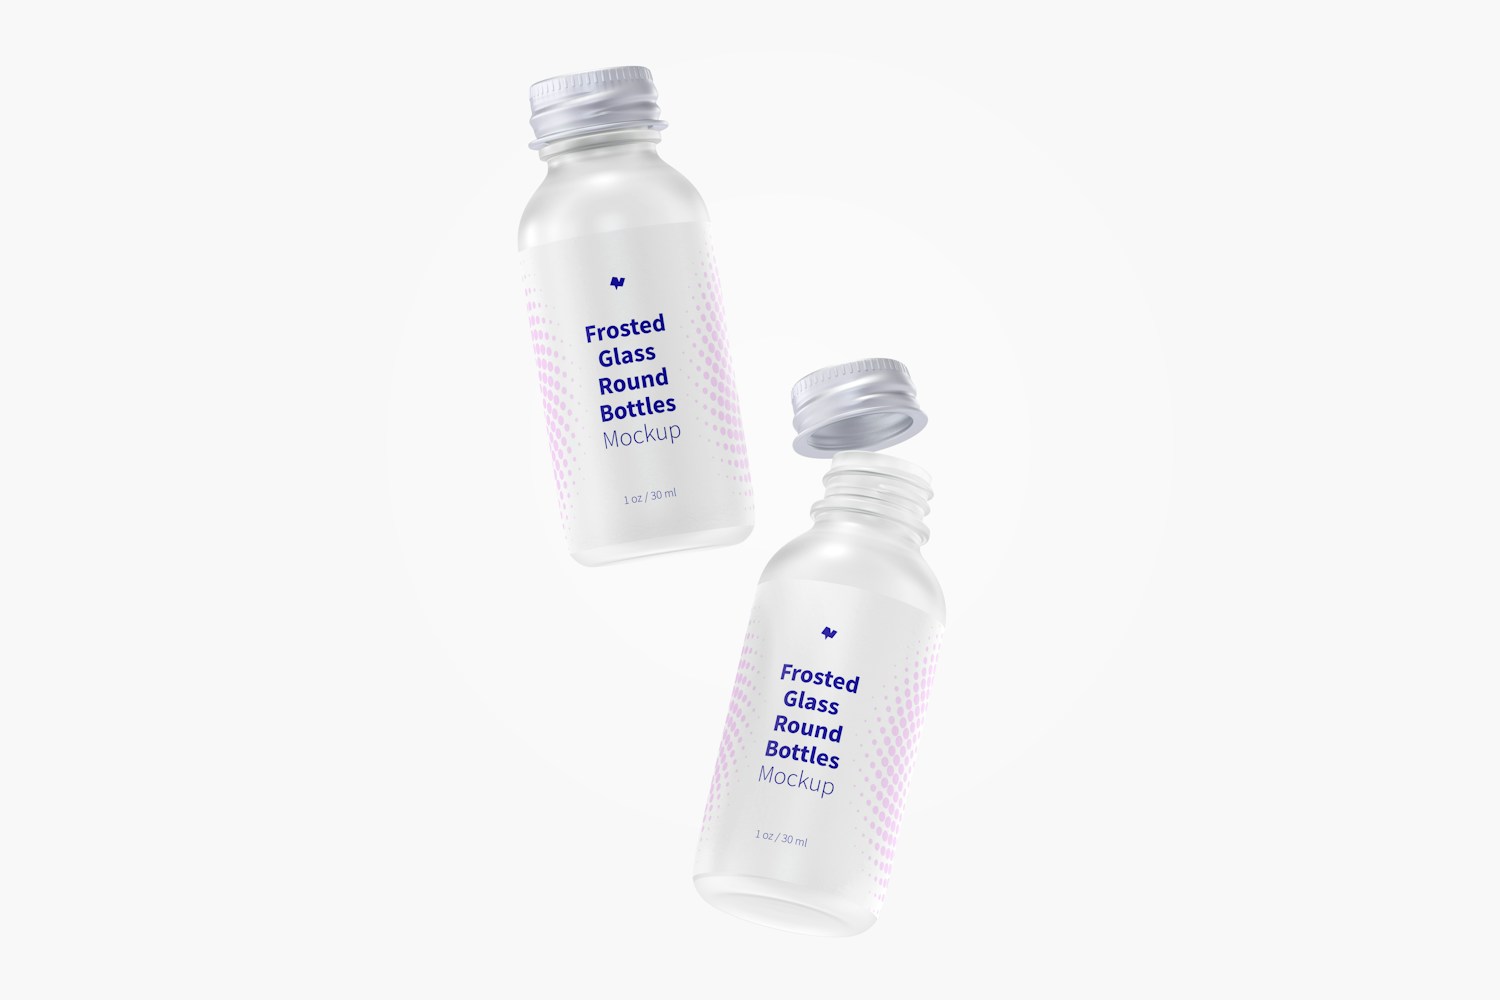 1 oz Frosted Glass Round Bottles Mockup, Falling